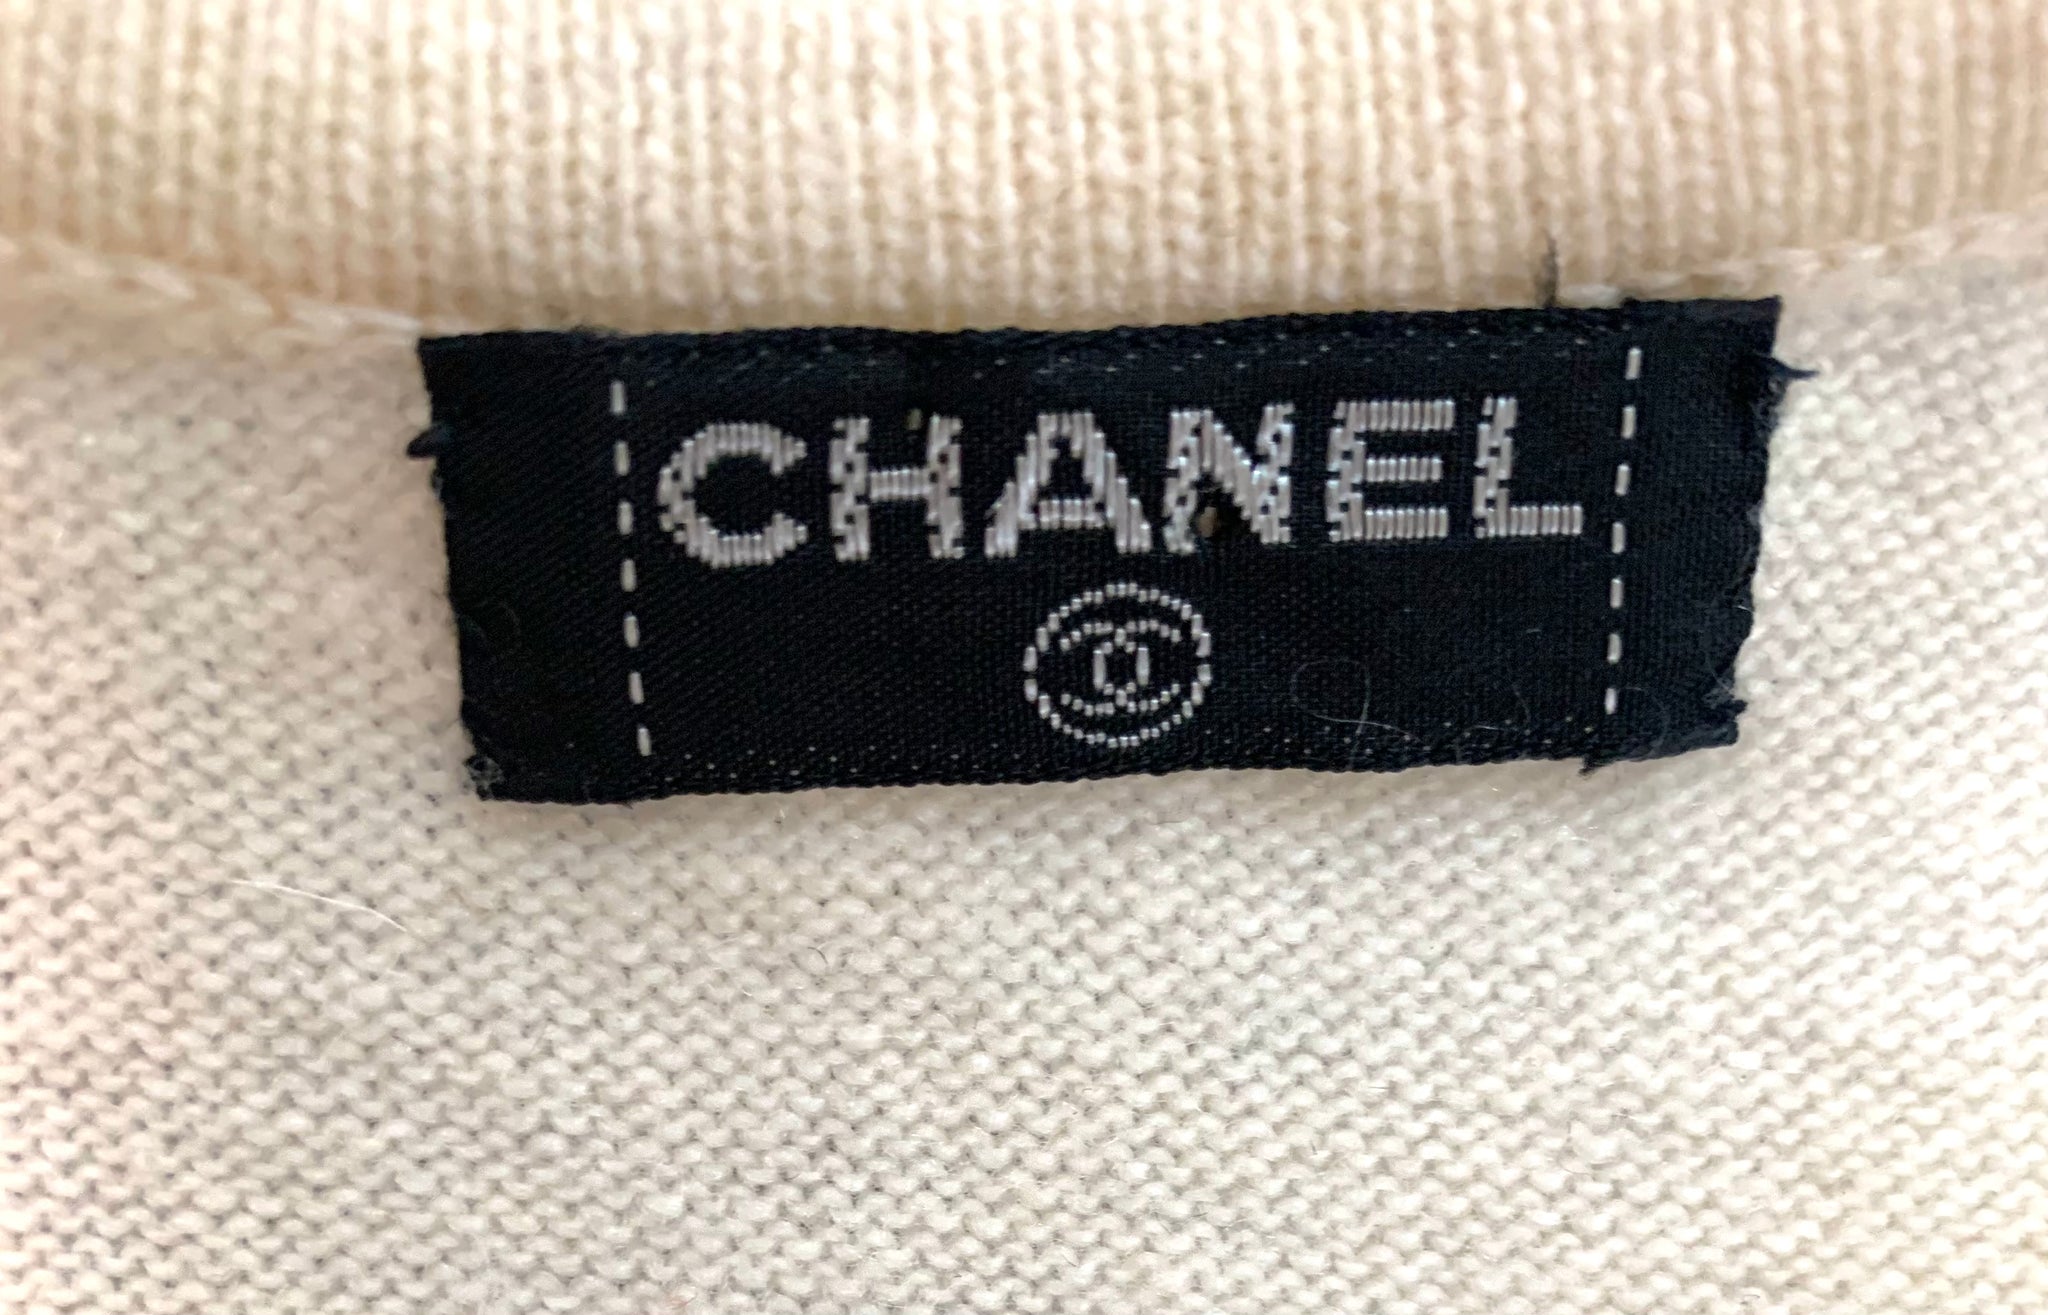 Chanel Y2K Two Tone Ivory Tank Style Sweater with Black Satin Waist Tie, label